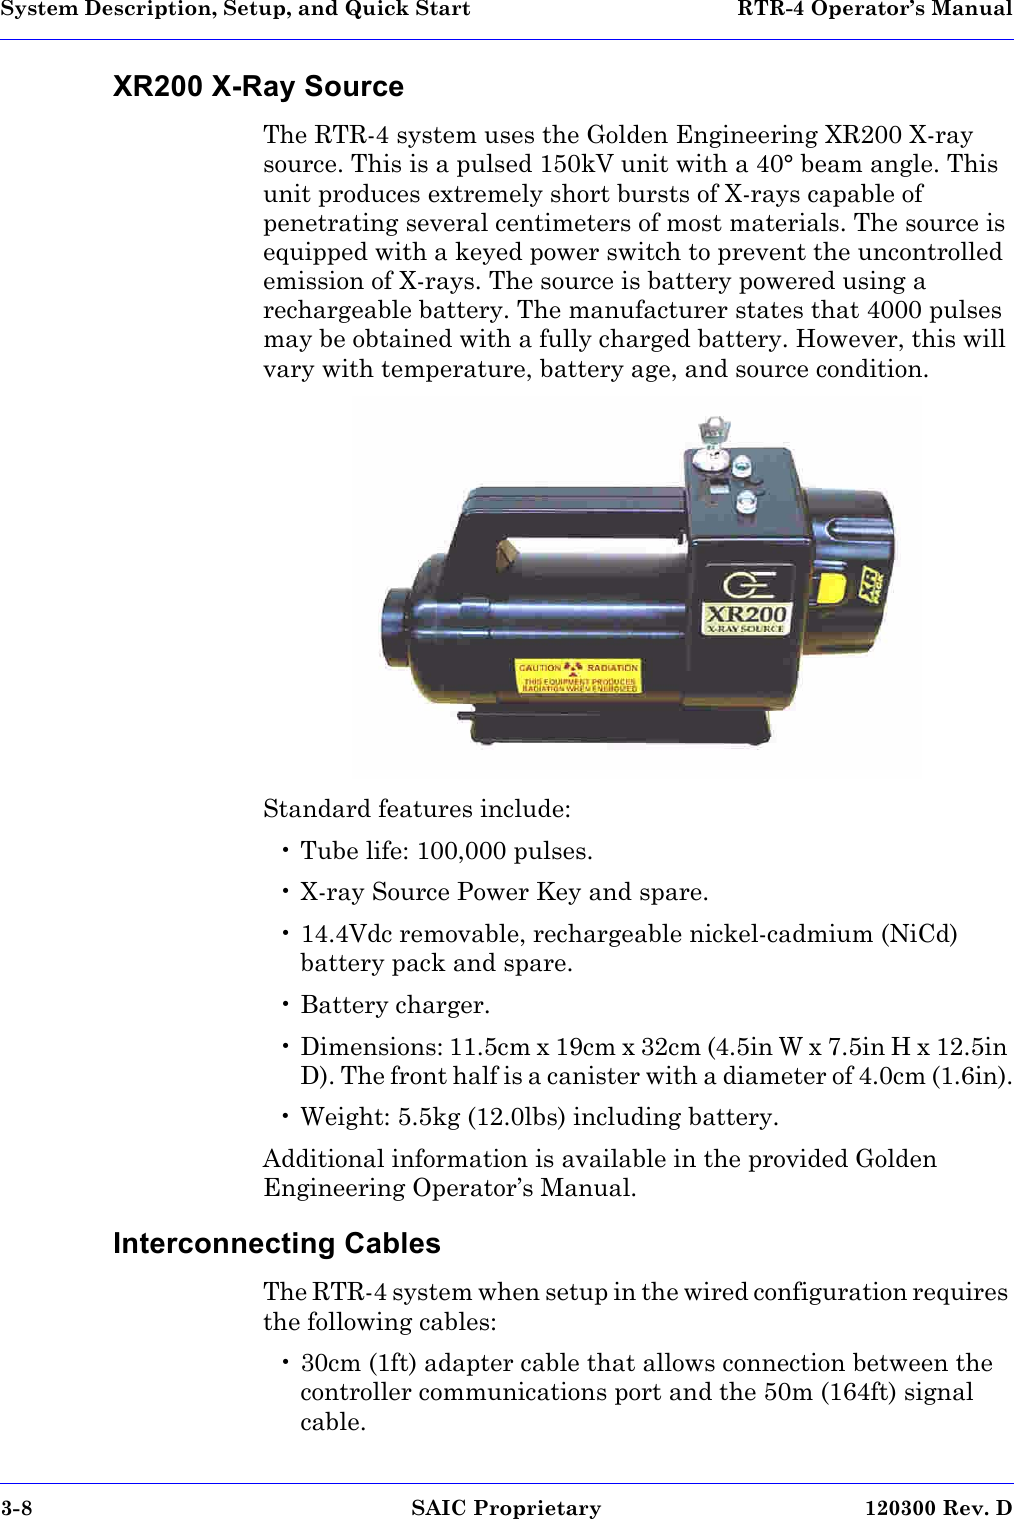 System Description, Setup, and Quick Start  RTR-4 Operator’s Manual3-8 SAIC Proprietary 120300 Rev. DXR200 X-Ray SourceThe RTR-4 system uses the Golden Engineering XR200 X-ray source. This is a pulsed 150kV unit with a 40° beam angle. This unit produces extremely short bursts of X-rays capable of penetrating several centimeters of most materials. The source is equipped with a keyed power switch to prevent the uncontrolled emission of X-rays. The source is battery powered using a rechargeable battery. The manufacturer states that 4000 pulses may be obtained with a fully charged battery. However, this will vary with temperature, battery age, and source condition. Standard features include:• Tube life: 100,000 pulses.• X-ray Source Power Key and spare.• 14.4Vdc removable, rechargeable nickel-cadmium (NiCd) battery pack and spare.• Battery charger.• Dimensions: 11.5cm x 19cm x 32cm (4.5in W x 7.5in H x 12.5in D). The front half is a canister with a diameter of 4.0cm (1.6in).• Weight: 5.5kg (12.0lbs) including battery.Additional information is available in the provided Golden Engineering Operator’s Manual. Interconnecting CablesThe RTR-4 system when setup in the wired configuration requires the following cables:• 30cm (1ft) adapter cable that allows connection between the controller communications port and the 50m (164ft) signal cable.